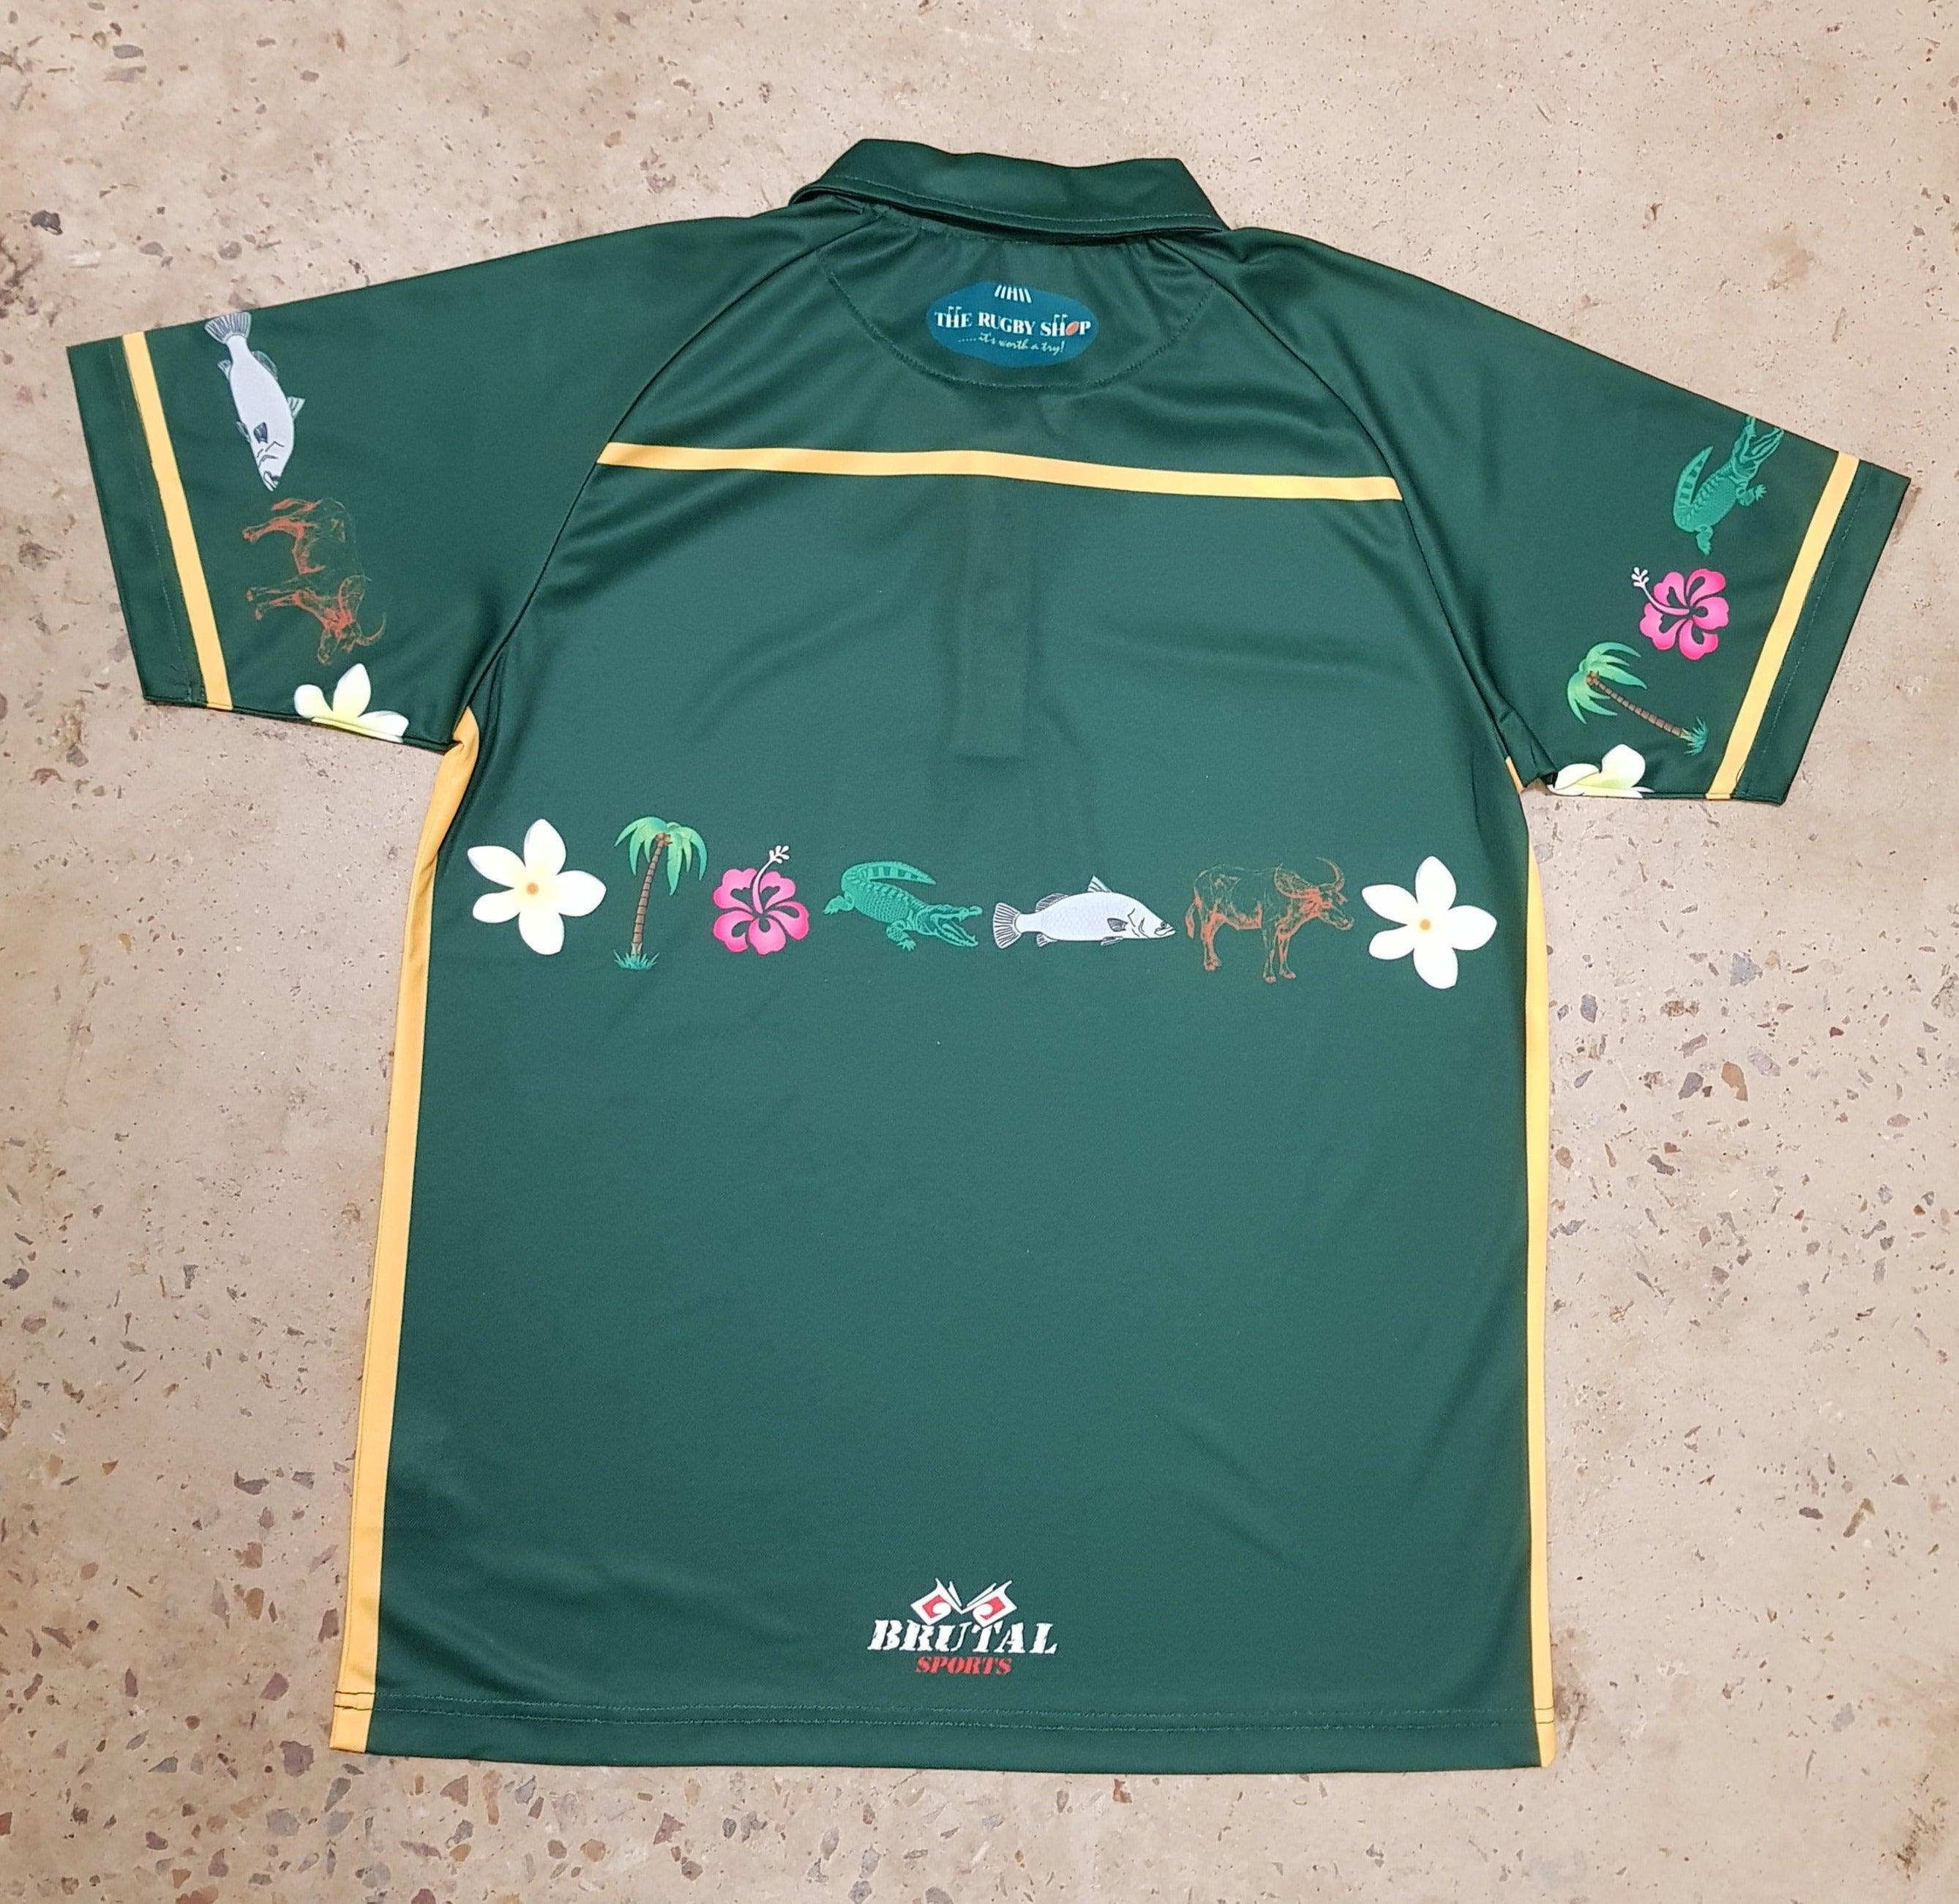 Masters 10s Polo 20 - The Rugby Shop Darwin